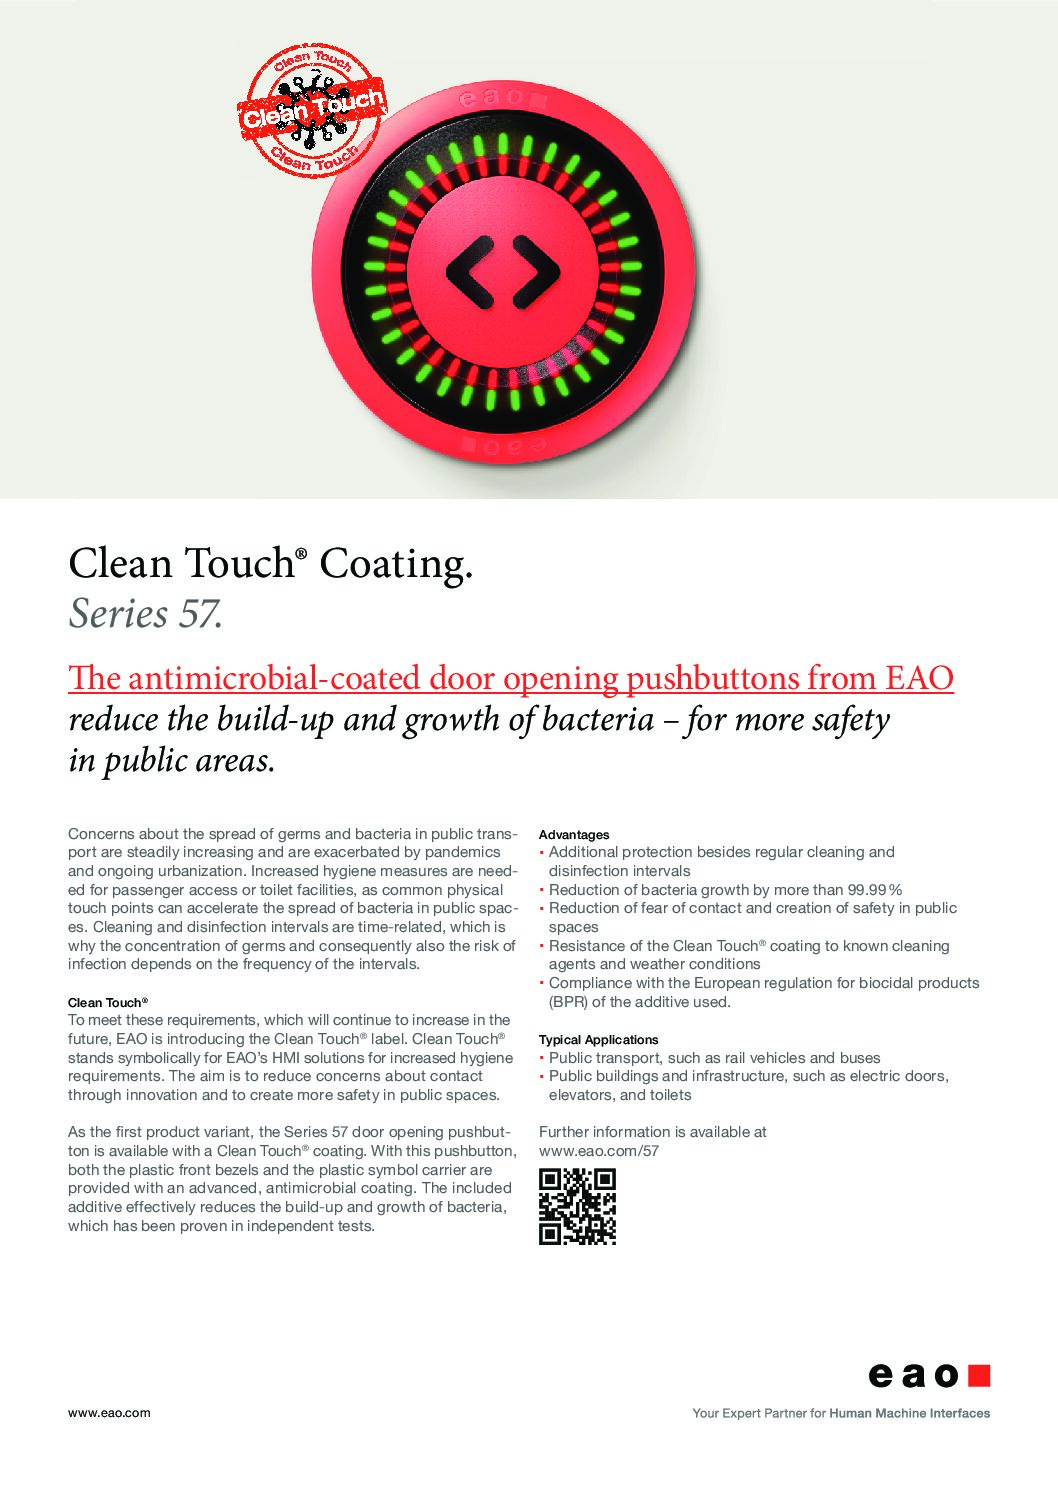 Clean Touch® Coating – Series 57